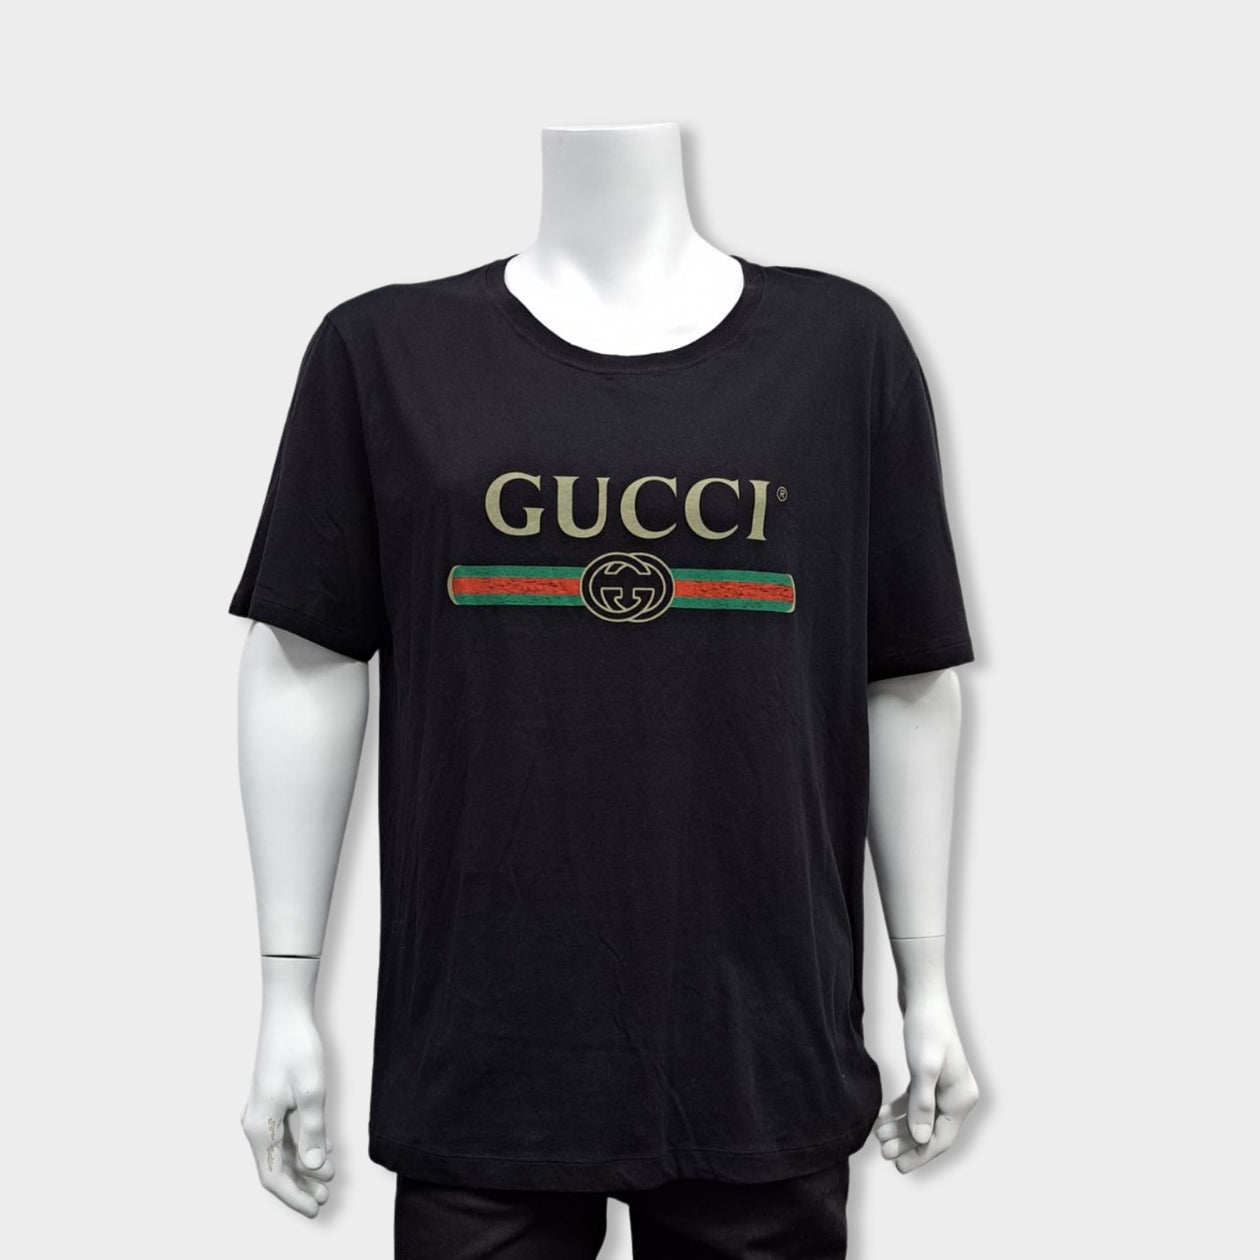 Gucci - Authenticated Polo Shirt - Black for Men, Never Worn, with Tag